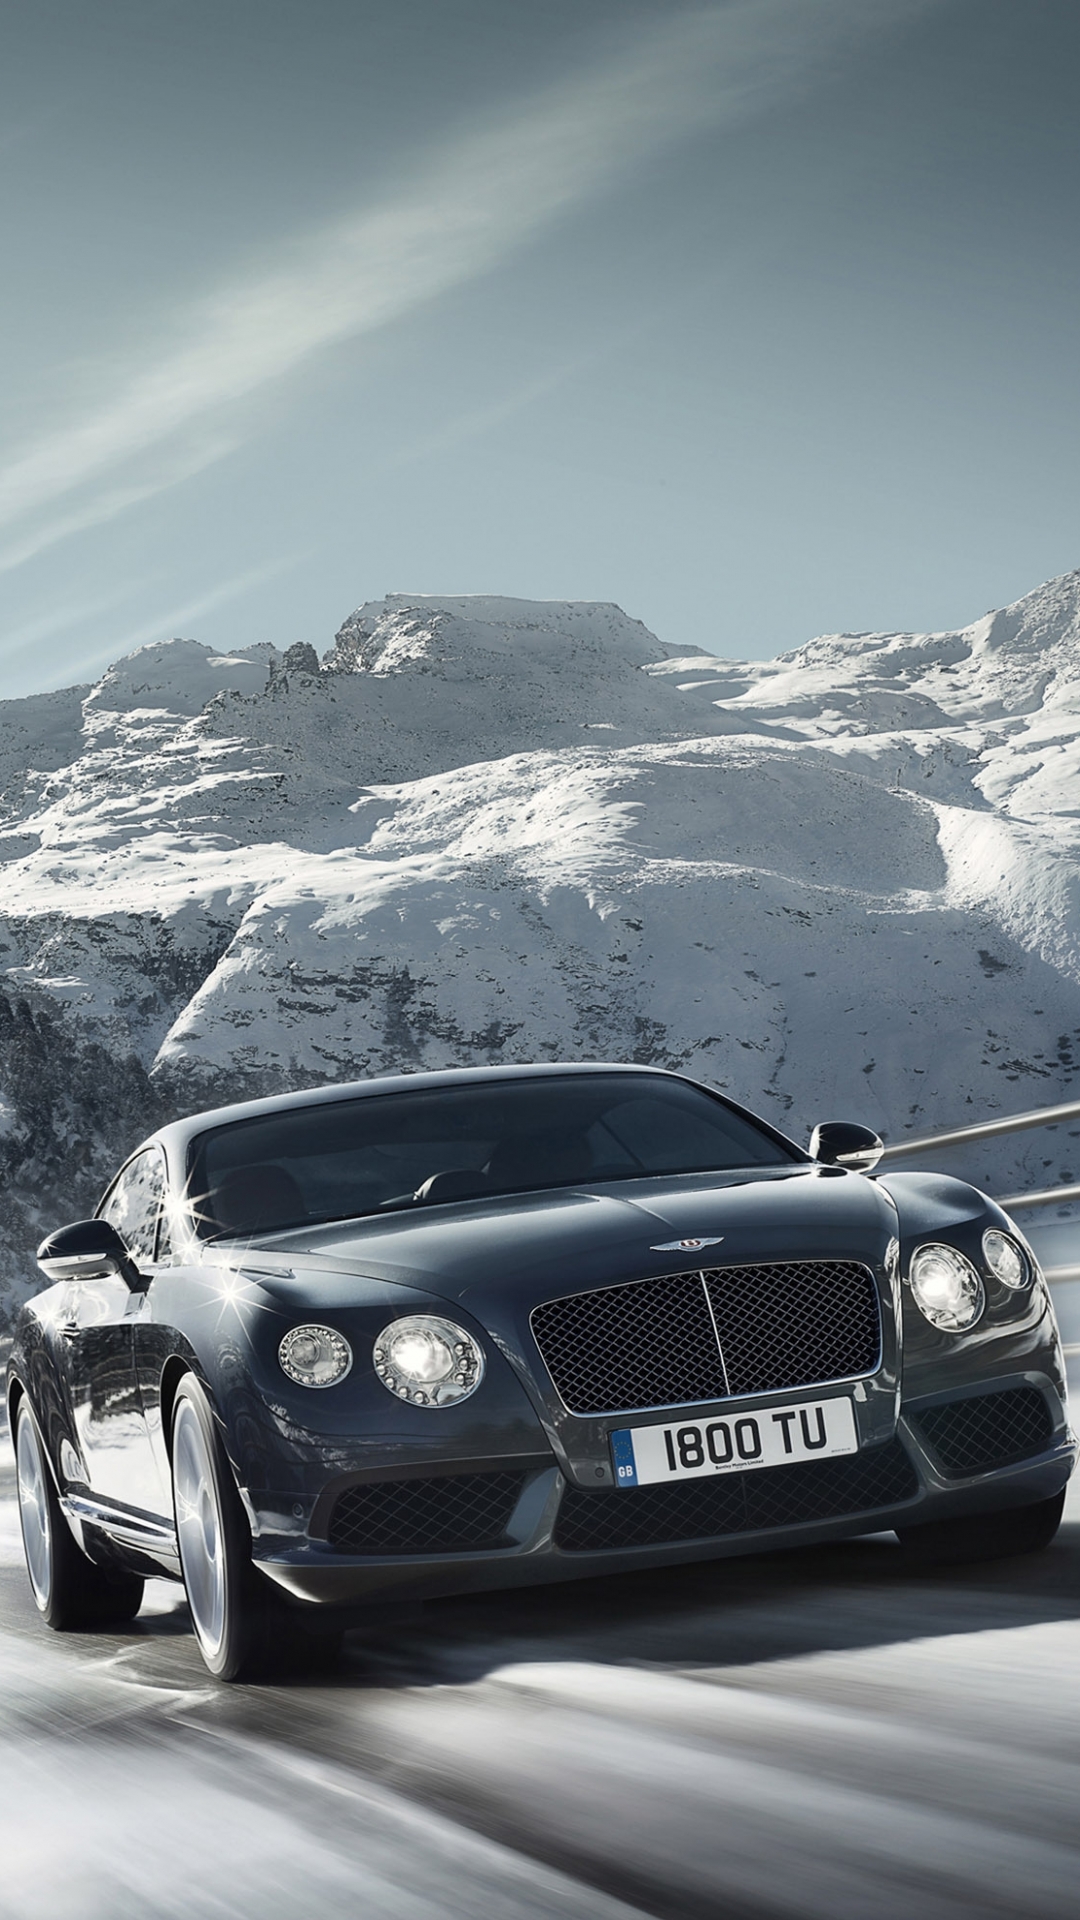 Bentley Phone Wallpaper - Mobile Abyss